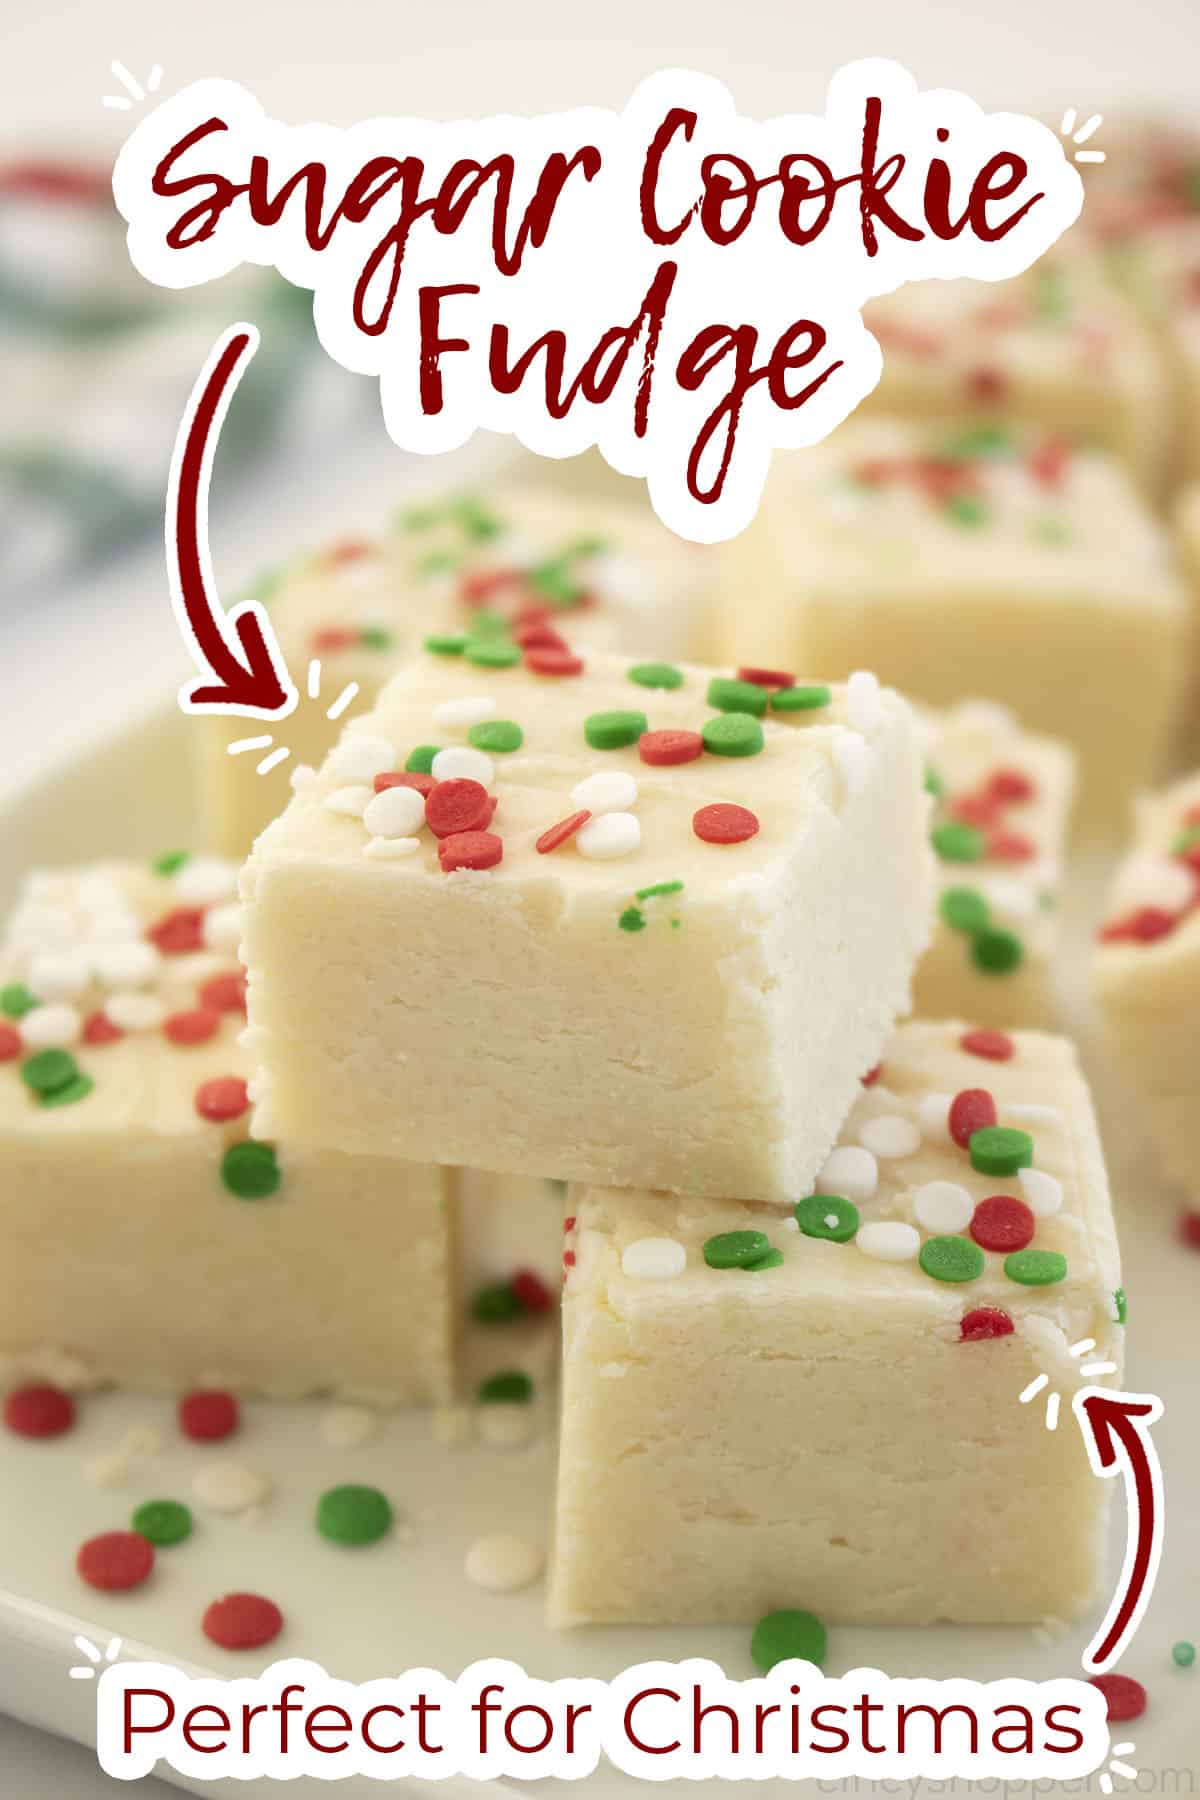 Text on image Sugar Cookie Fudge Perfect for Christmas.